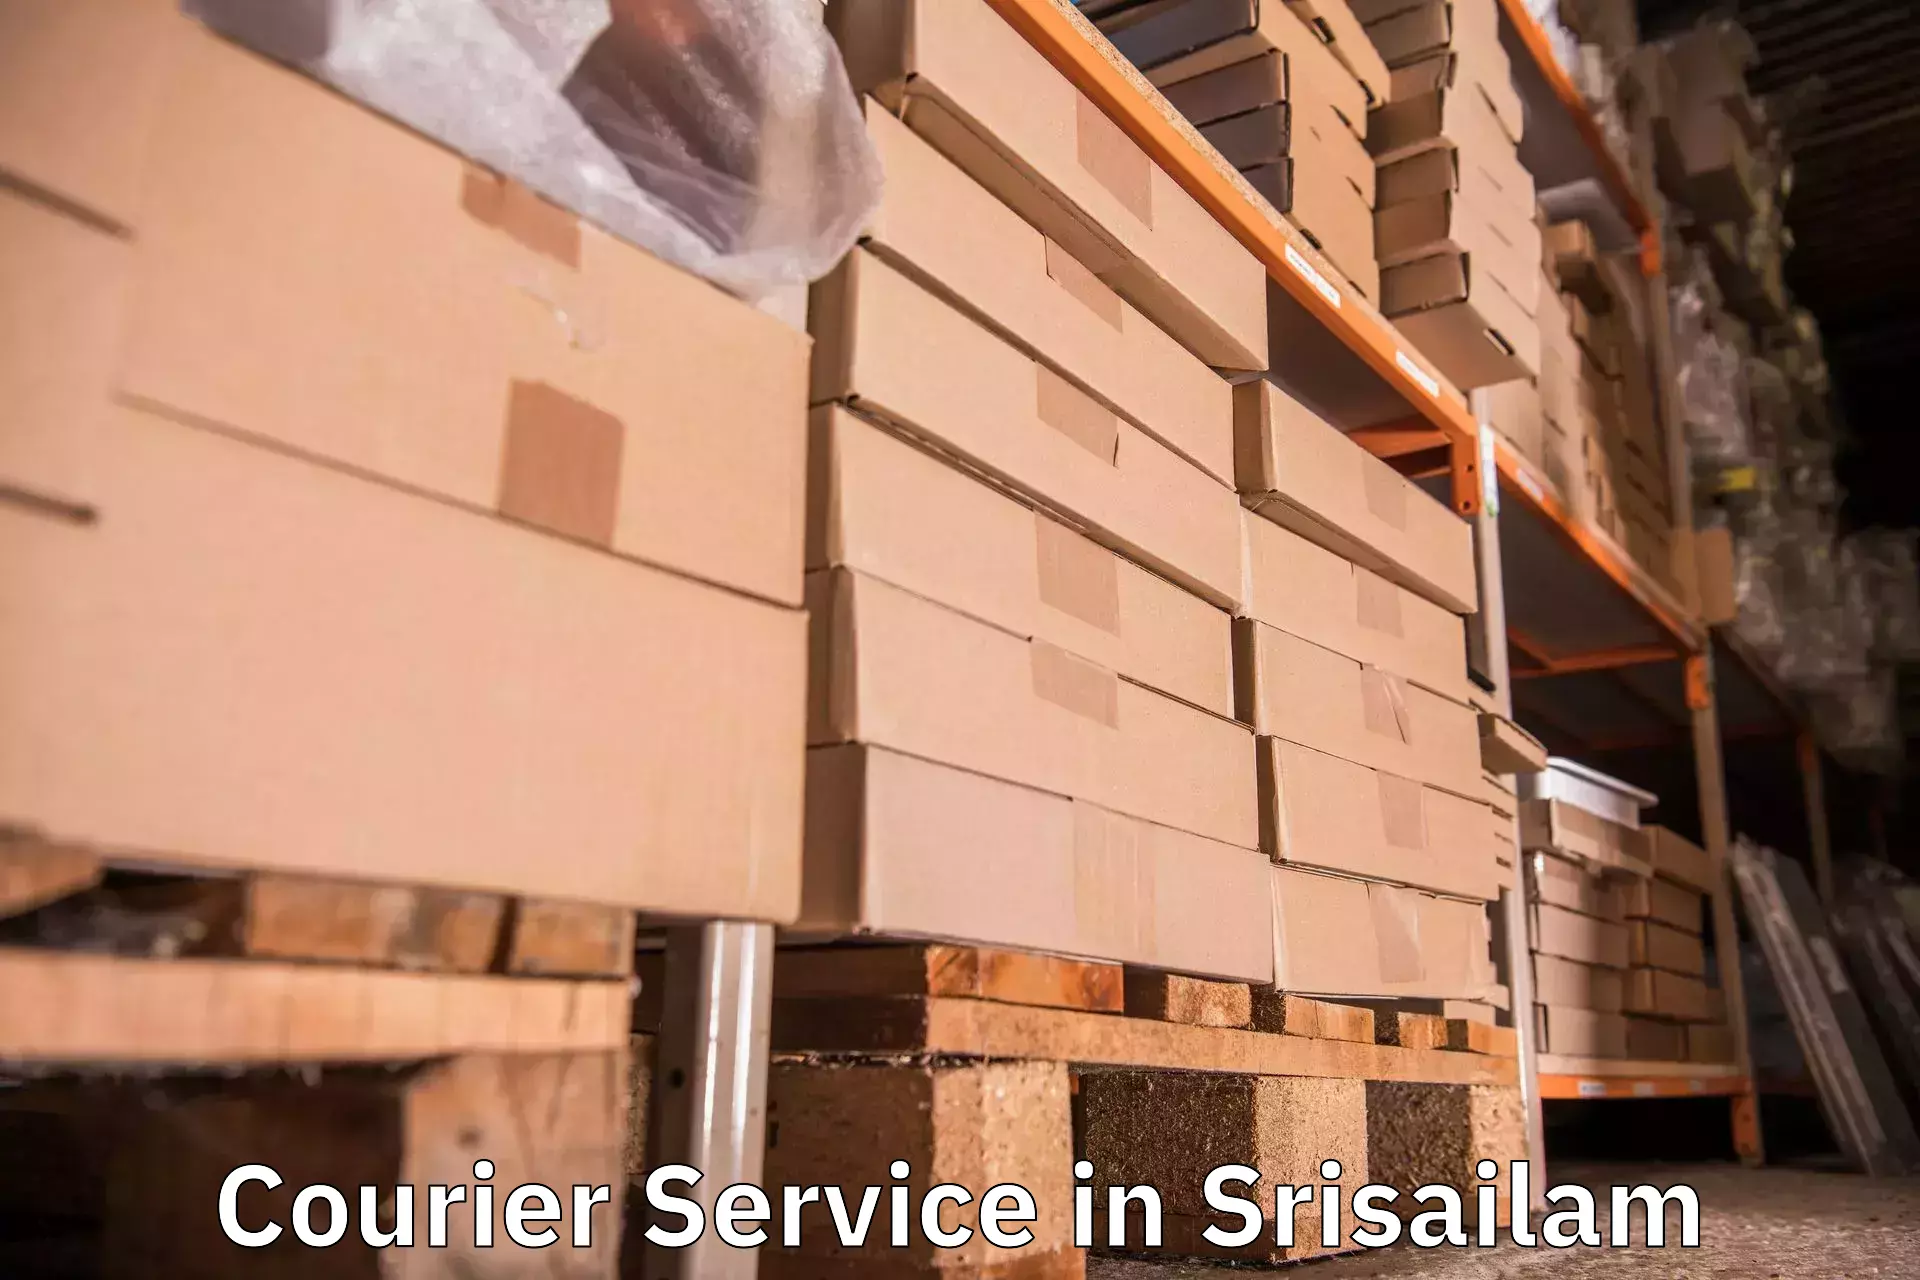 Residential courier service in Srisailam